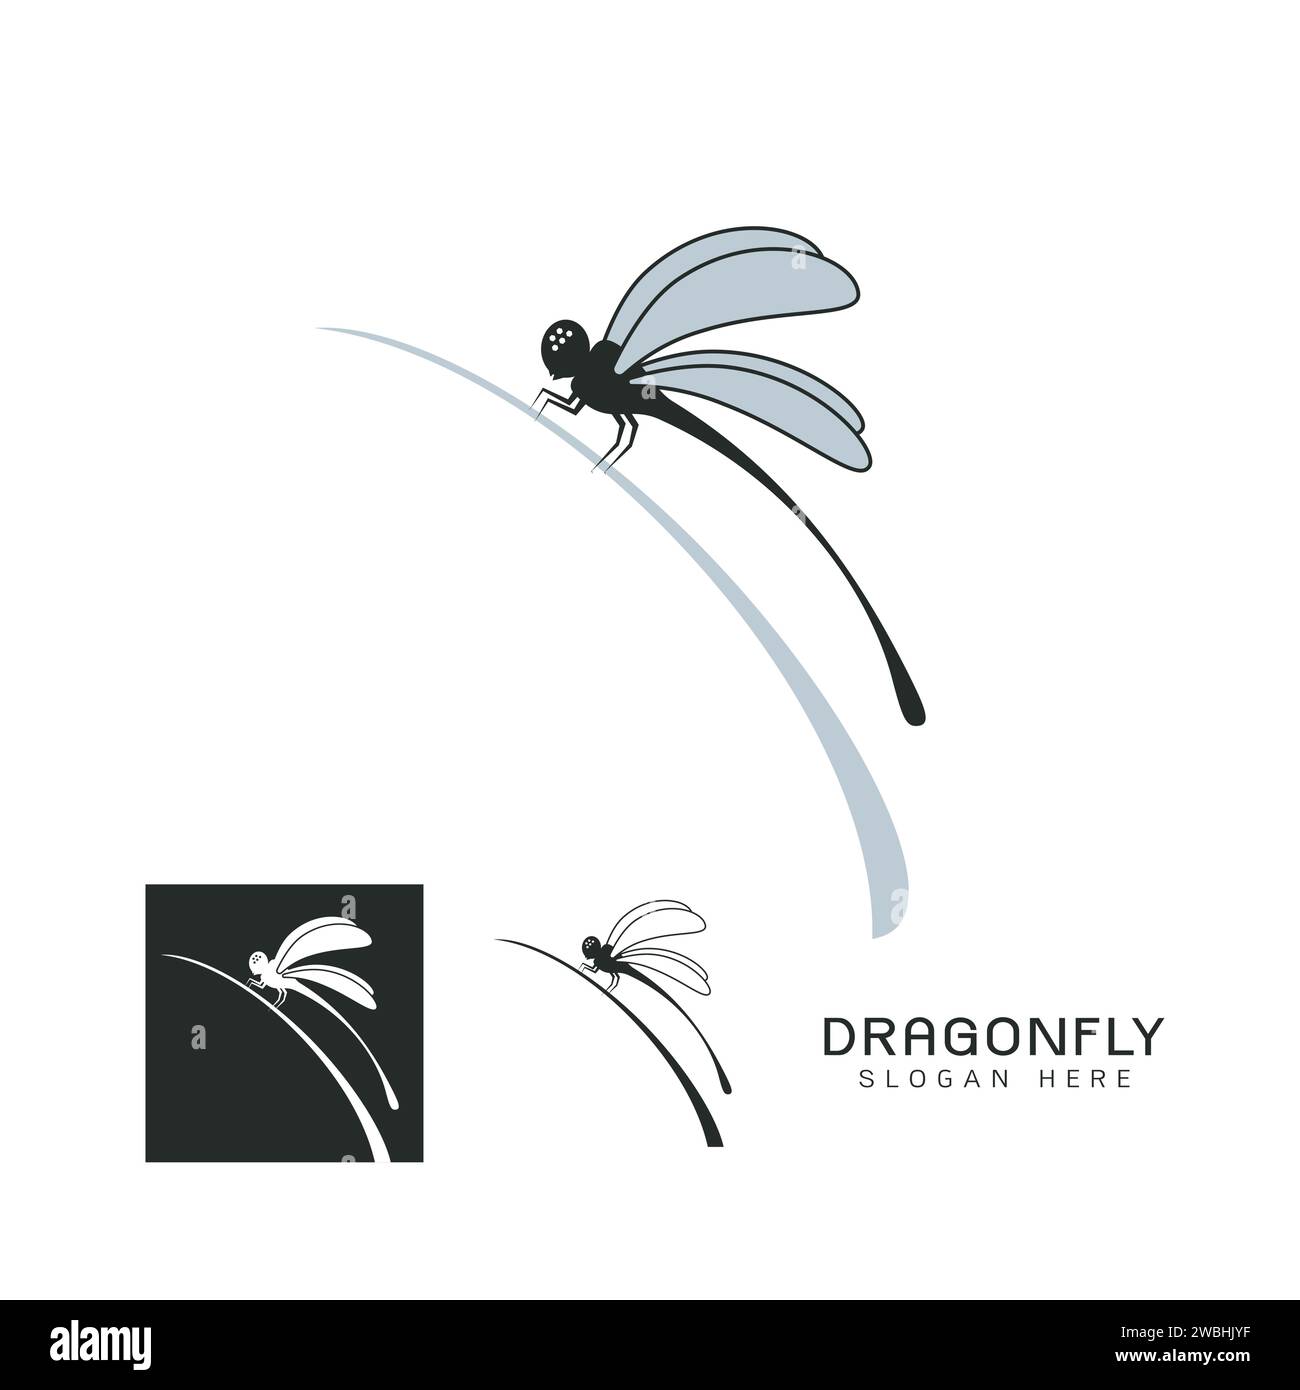 Set of Beautiful logo icon dragonfly,Stylized image of Dragonfly on leaf logo template,Dragonfly tattoo,Dragonfly line art on white backgrond Vector i Stock Vector